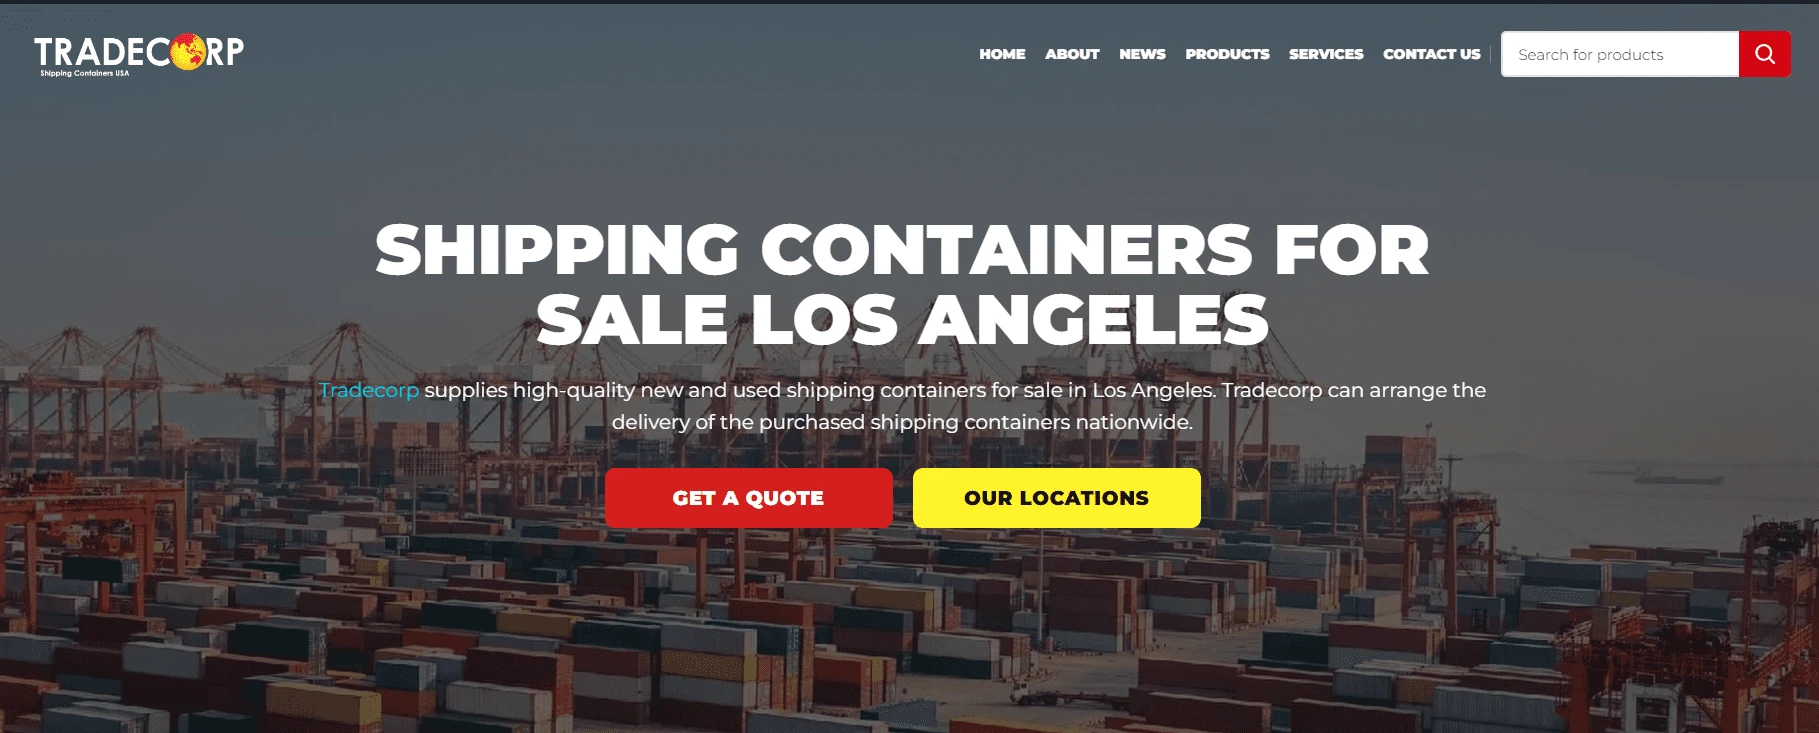 shipping containers for sale los angeles, shipping containers for sale, shipping containers